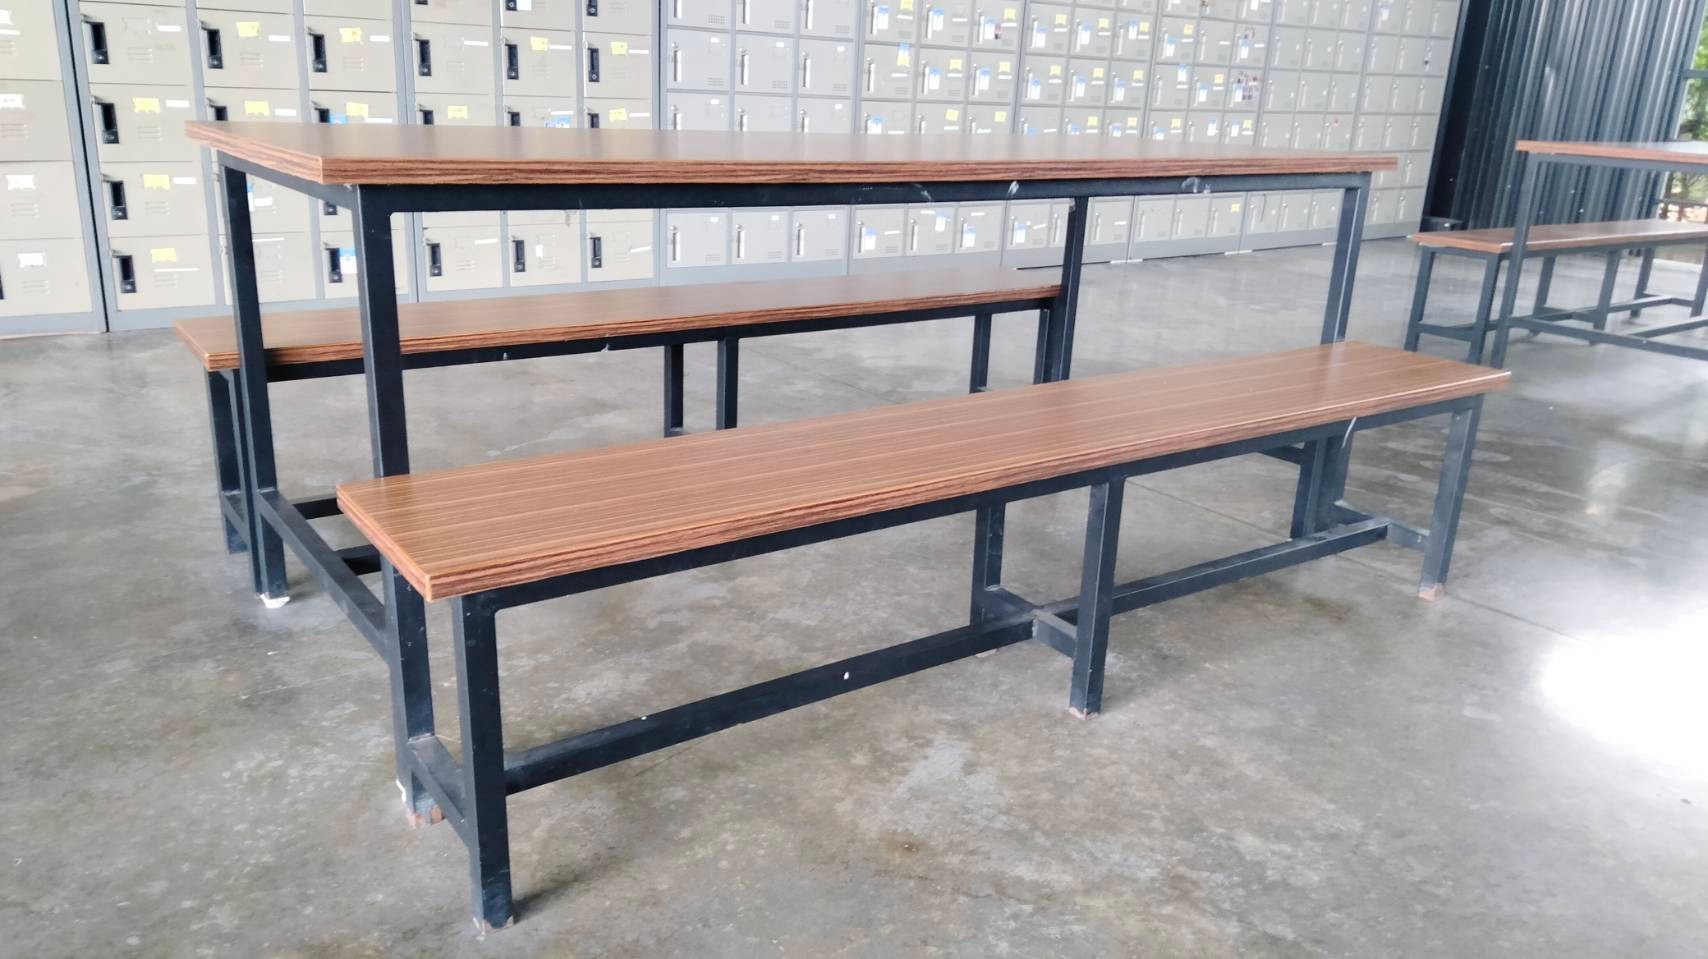 69063::DF-02-TABLE-BENCH::A Tokai canteen set with 2 benches. Table Dimension (WxDxH) cm : 182.9x76x75. Bench Dimension (WxDxH) cm : 182.9x30x43 Dining Sets